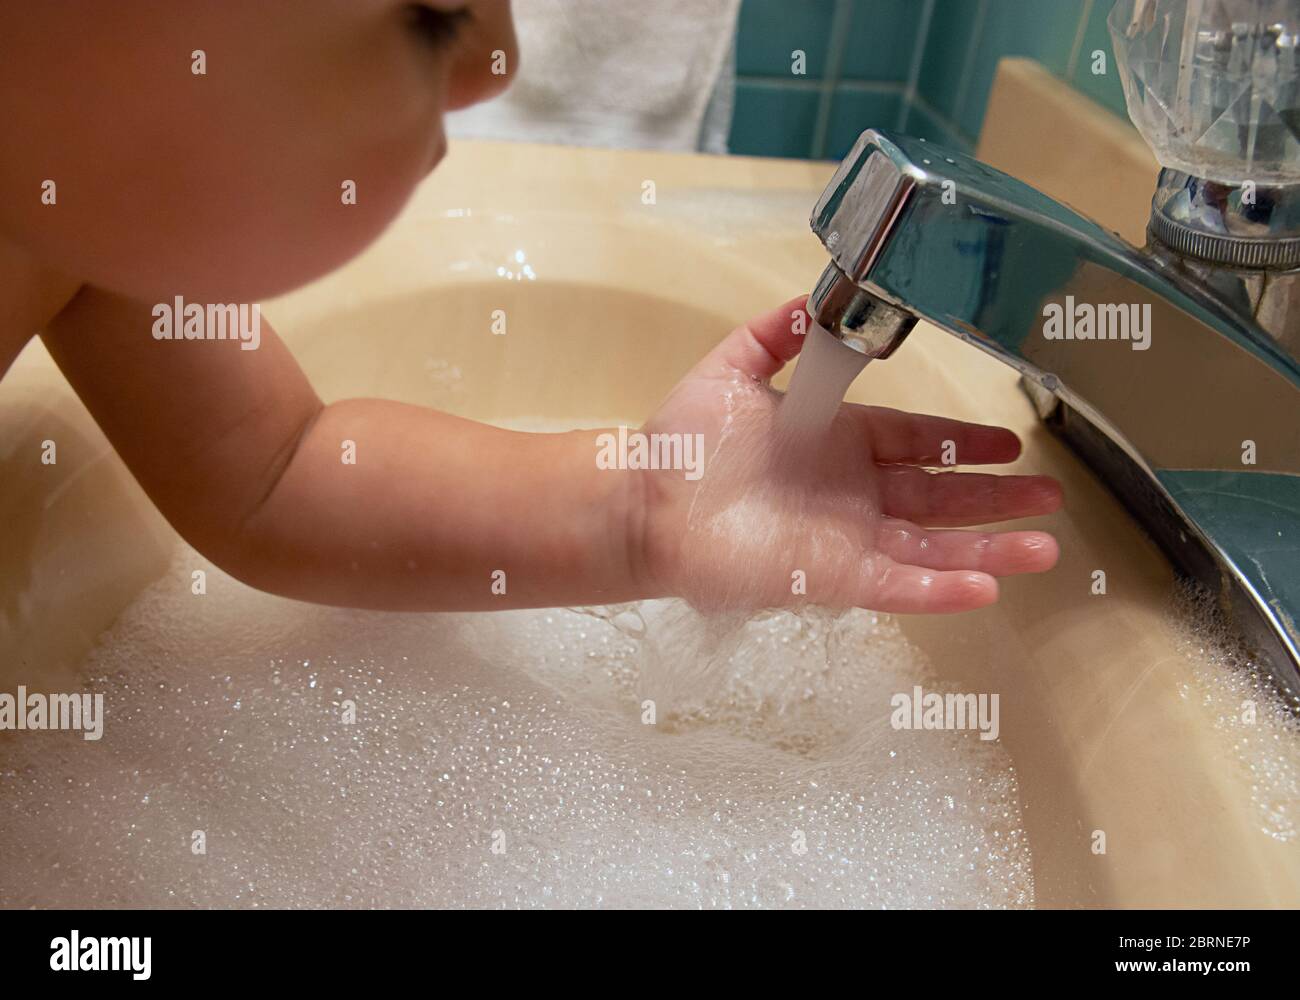 Little boy in a bathroom washing his hands in the sink Stock Photo